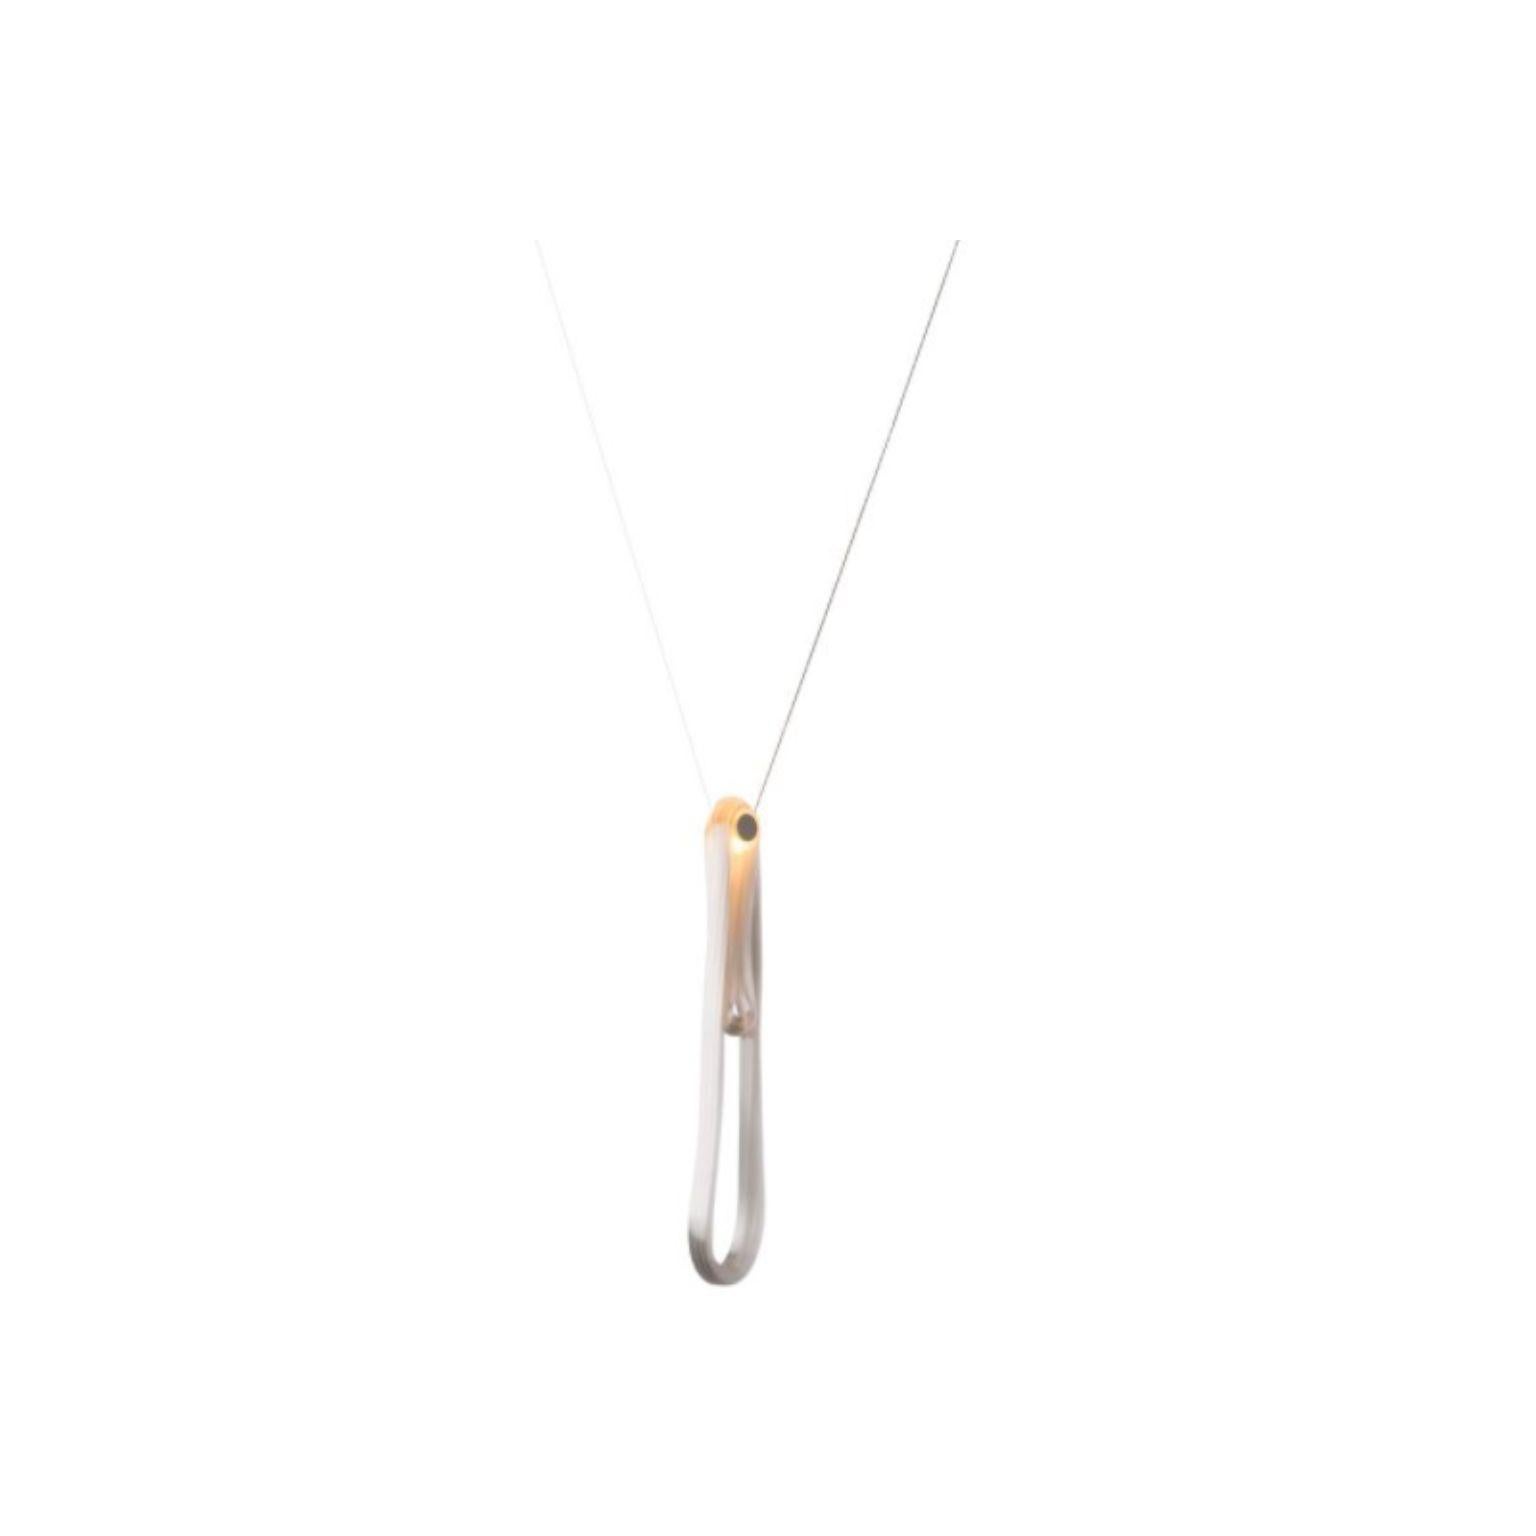 87.1 Pendant by Bocci
Dimensions: D 11.6 x H 300 cm
Materials: brushed nickel round canopy
Weight: 1.4 kg
Also available in different dimensions.

All our lamps can be wired according to each country. If sold to the USA it will be wired for